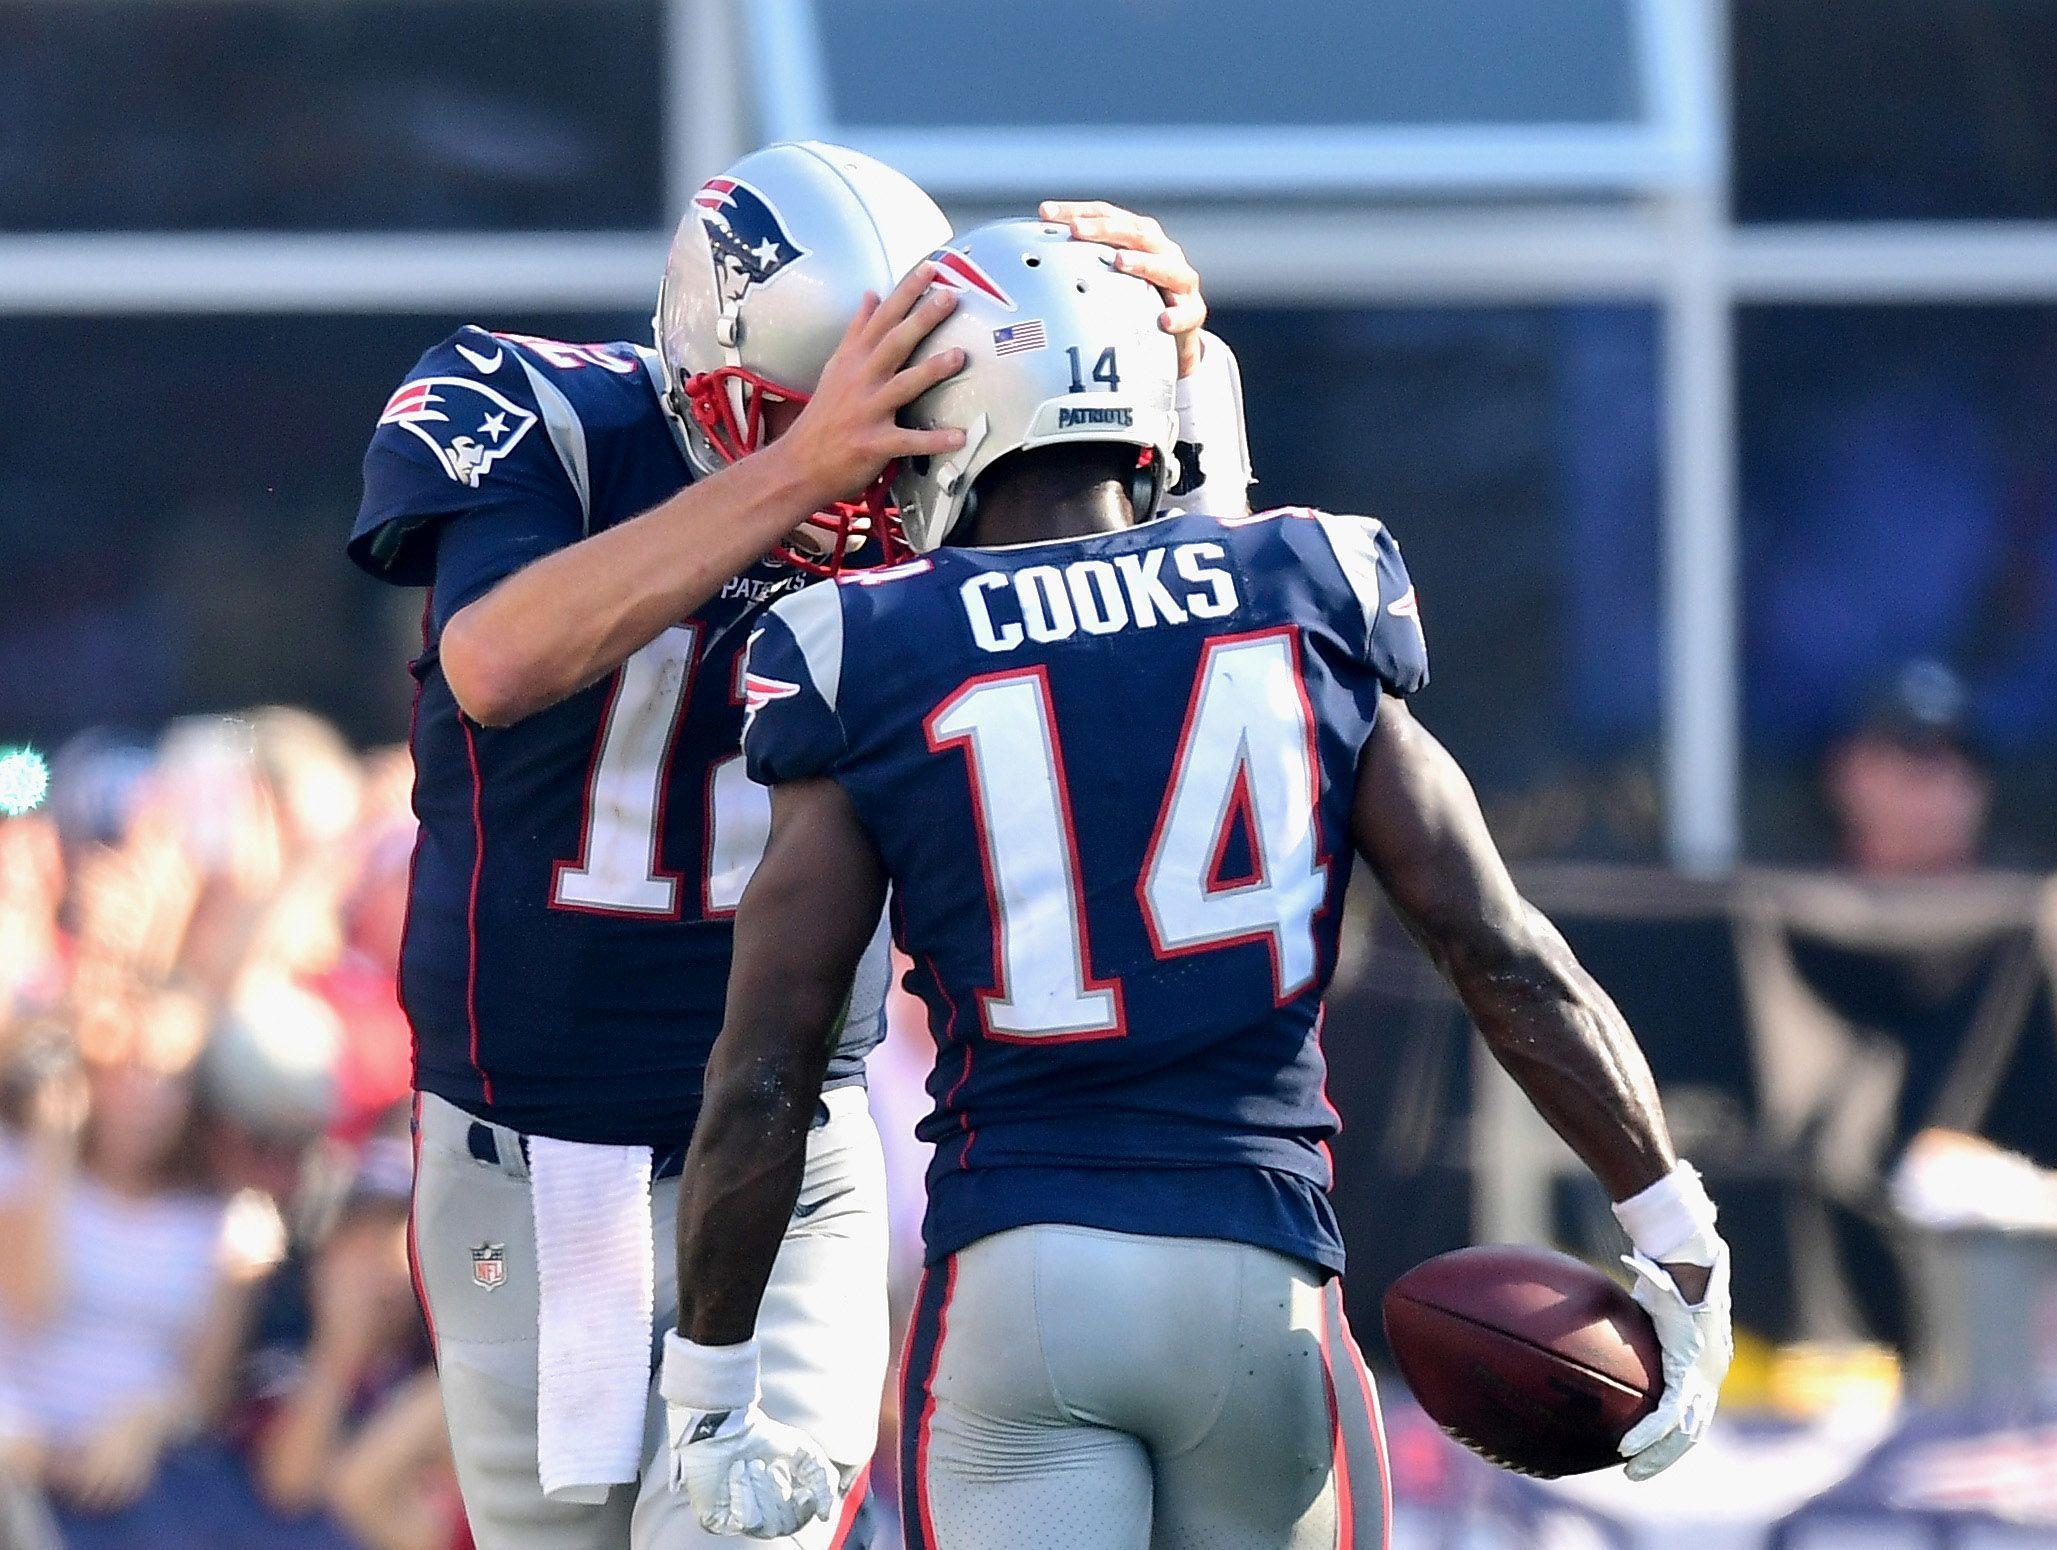 New England Patriots: Brandin Cooks breaks out with great performance